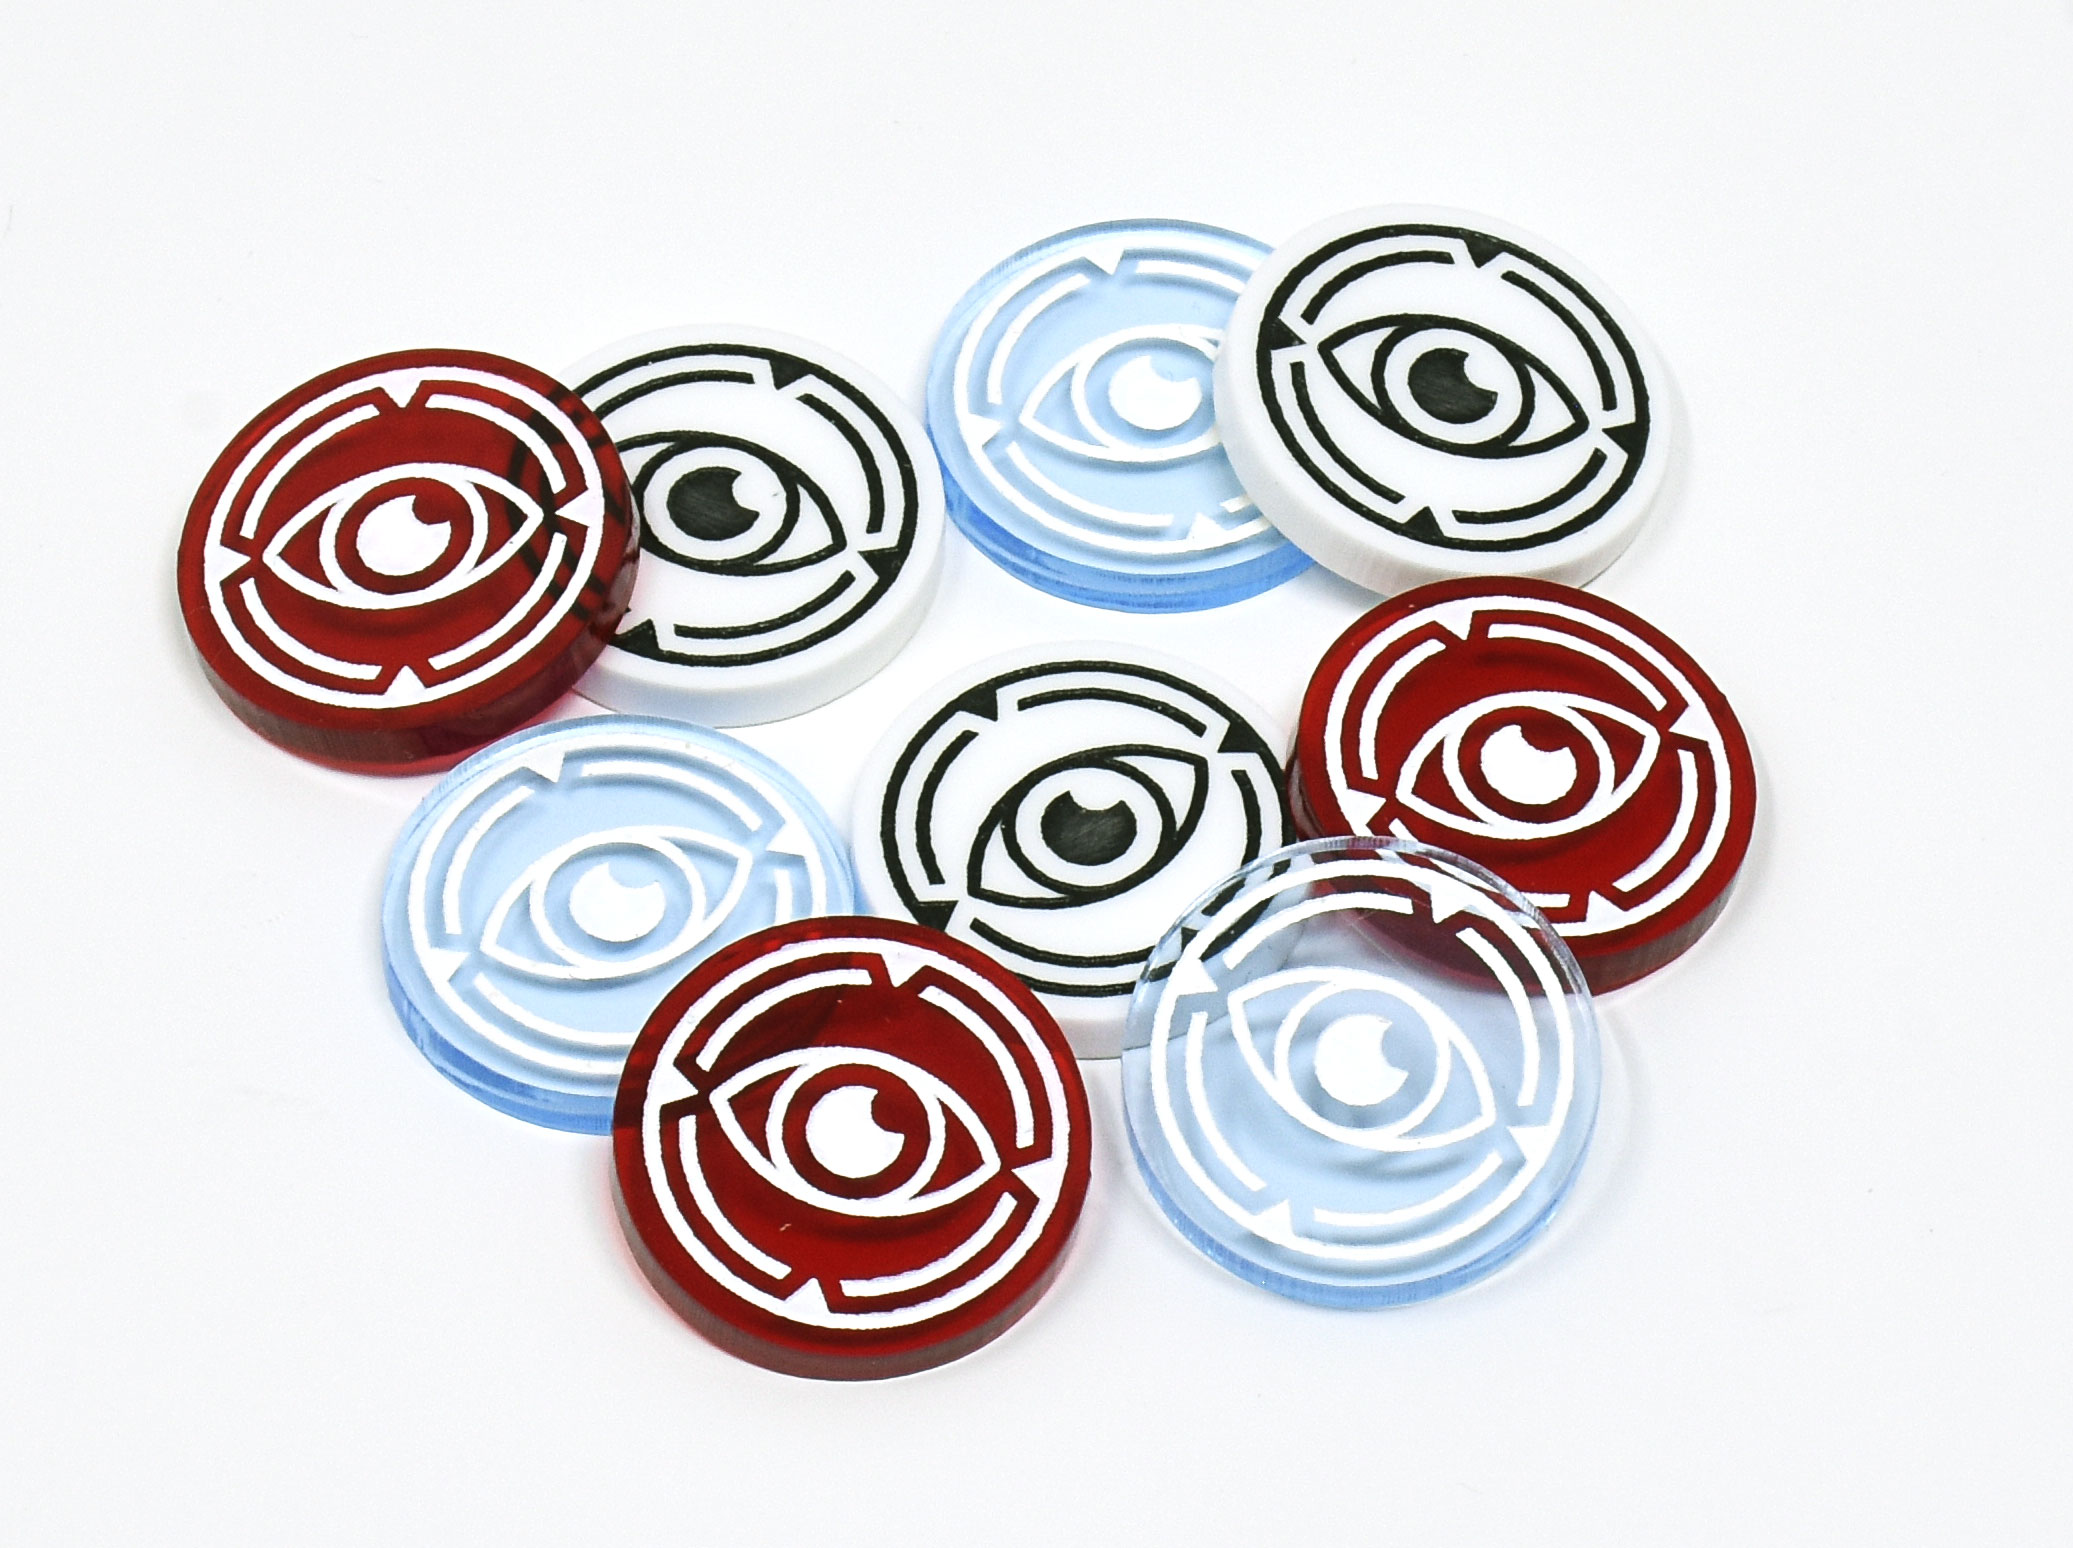 Star Wars Destiny Acrylic Mirrored Silver Resource Credit Tokens 